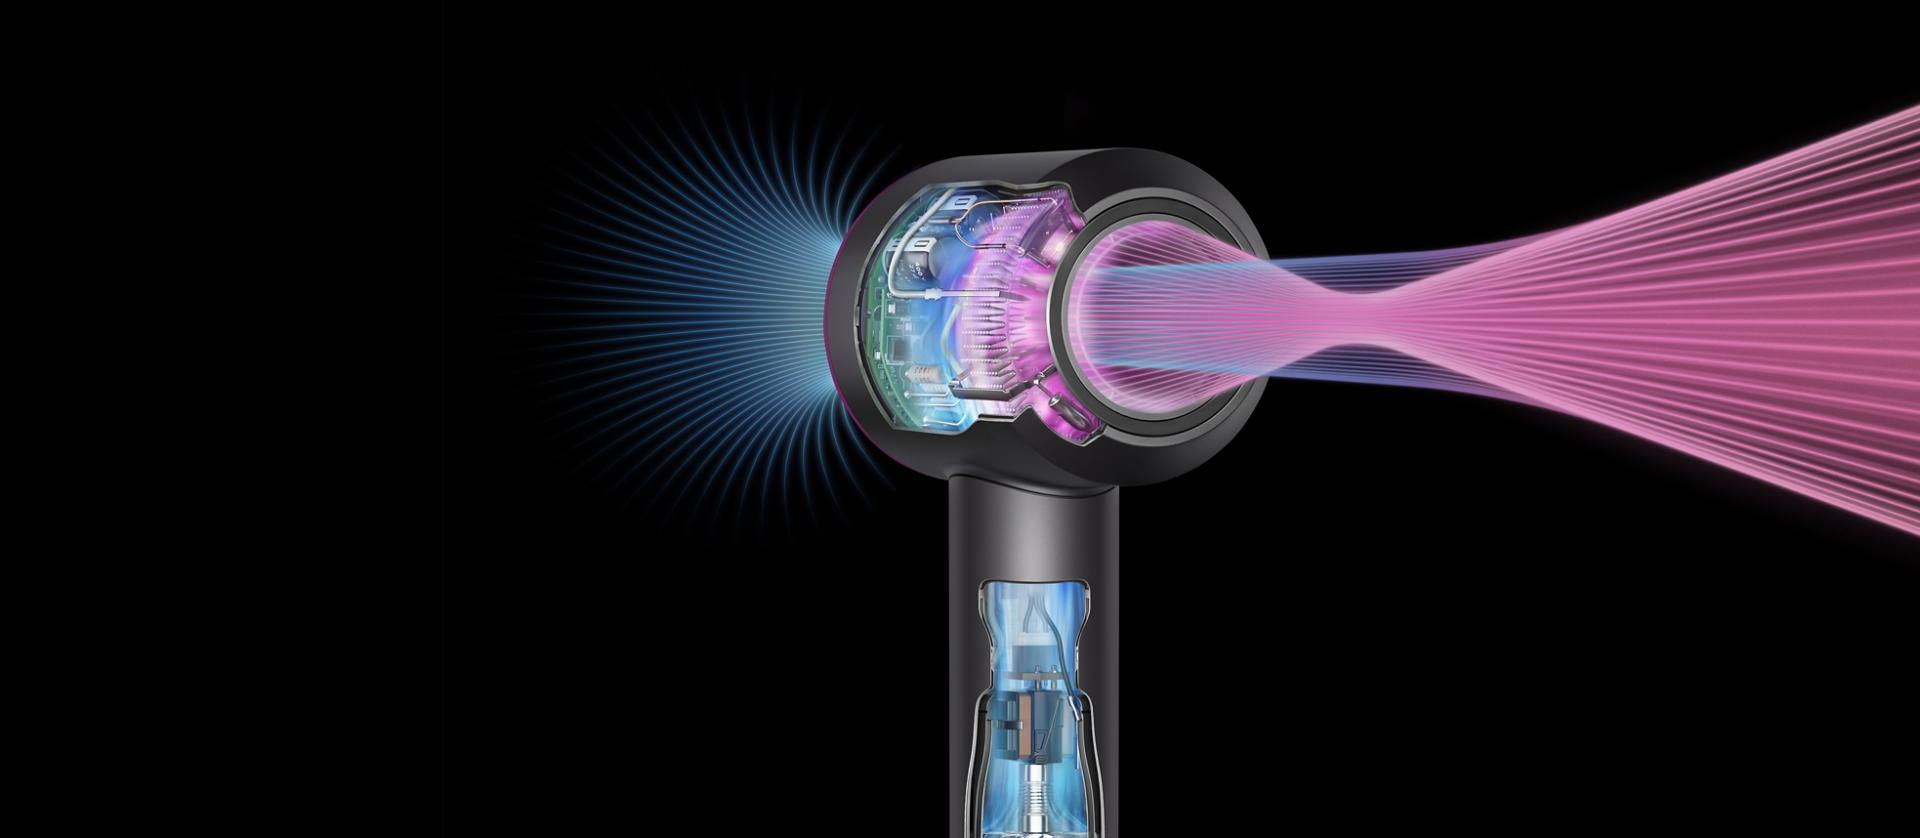 Illustration of the inner workings of a Dyson Supersonic hair dryer